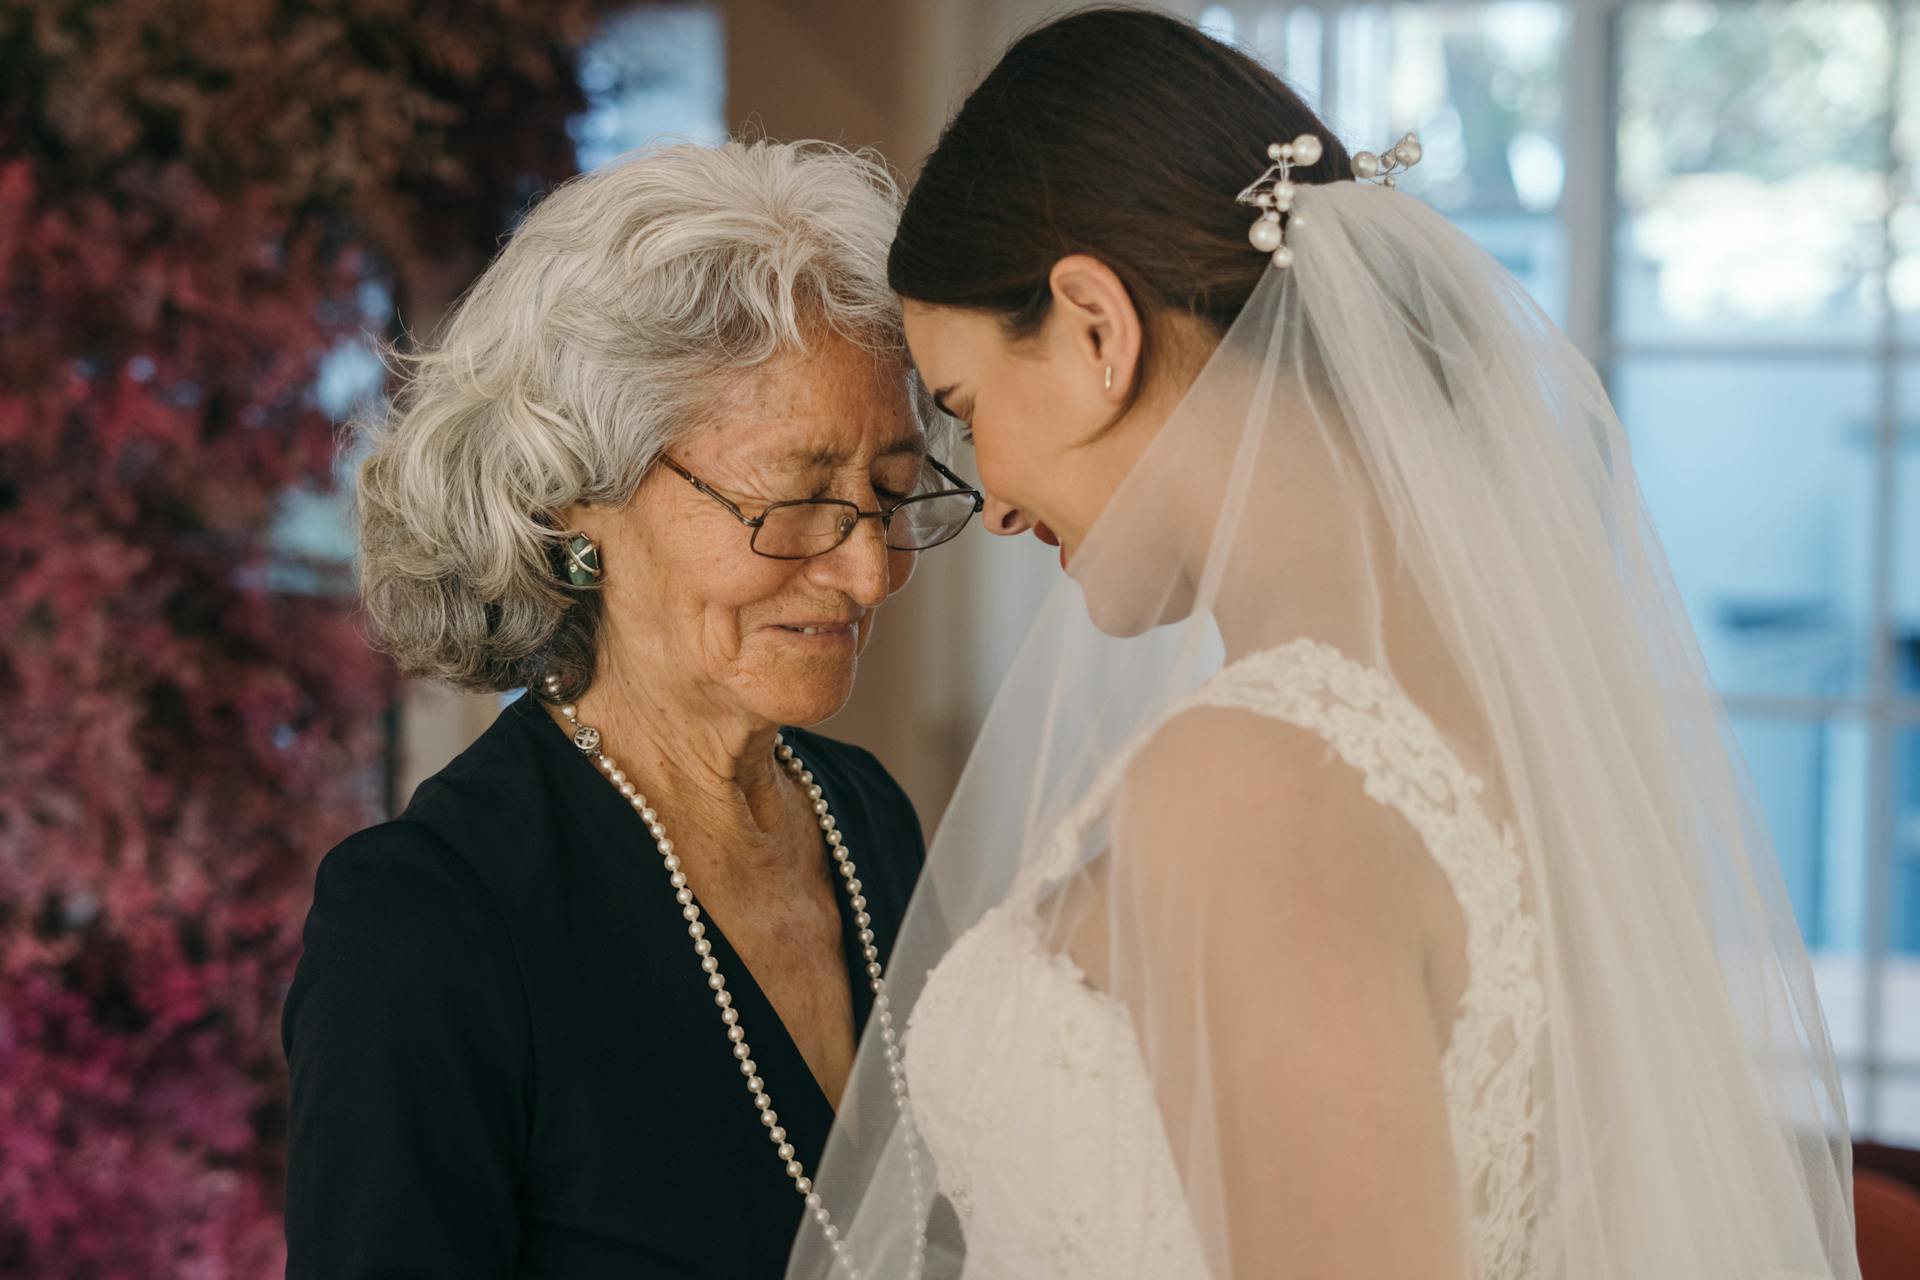 A bride and her mother | Source: Pexels